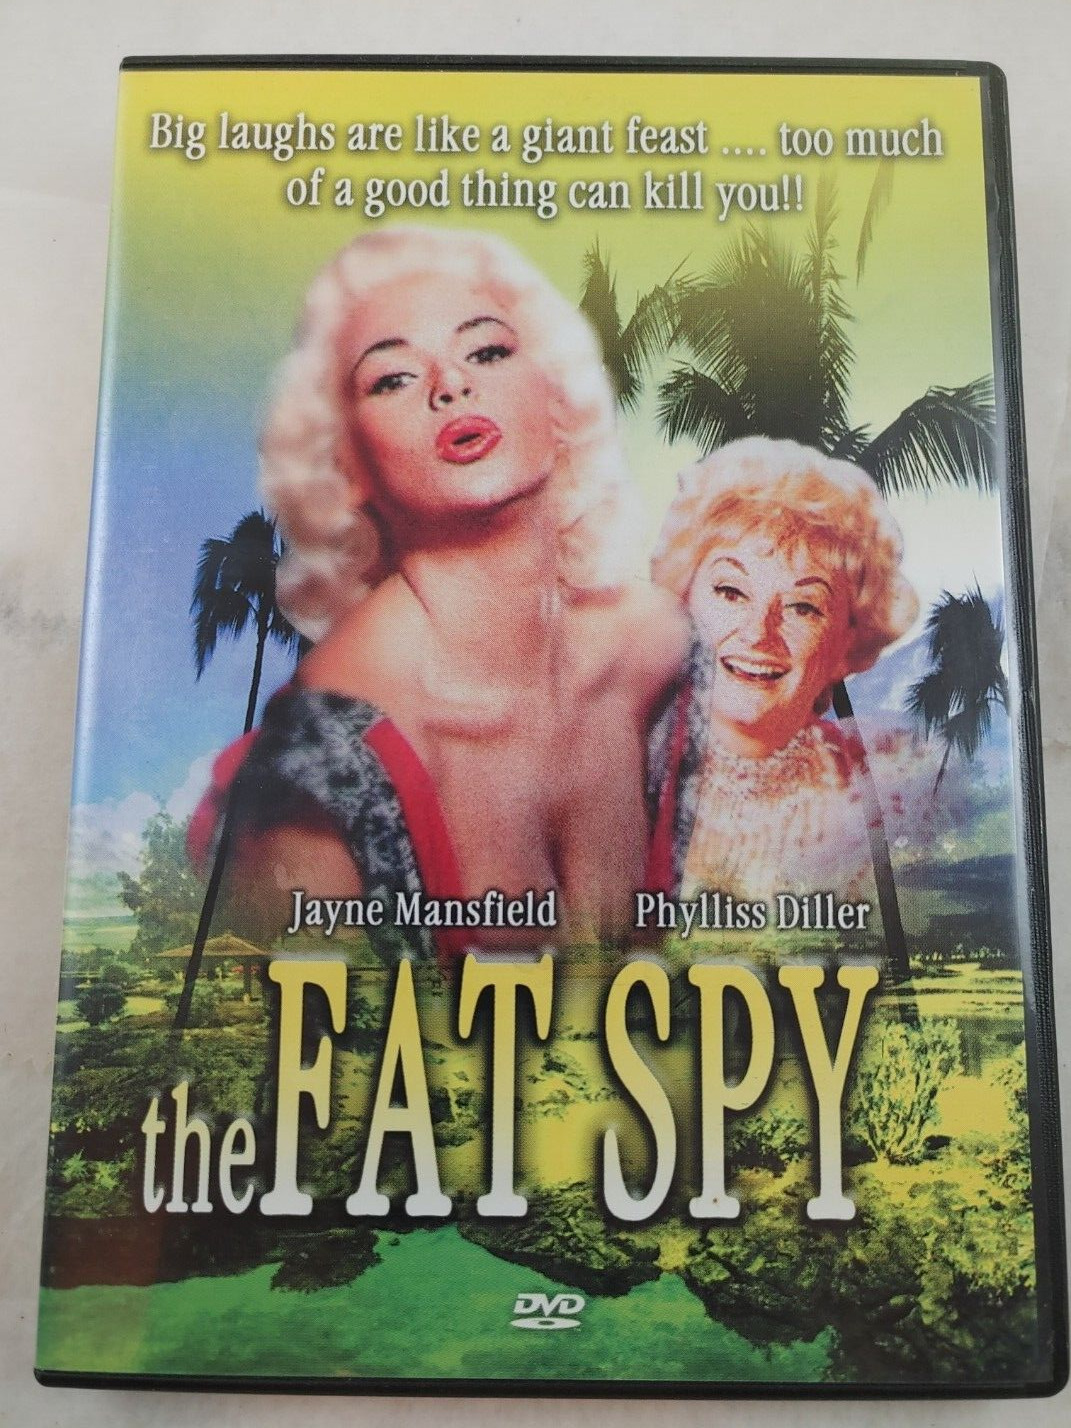 The Fat Spy (DVD, 2006) 1966 Comedy Starring Jayne Mansfield, Phyllis Diller